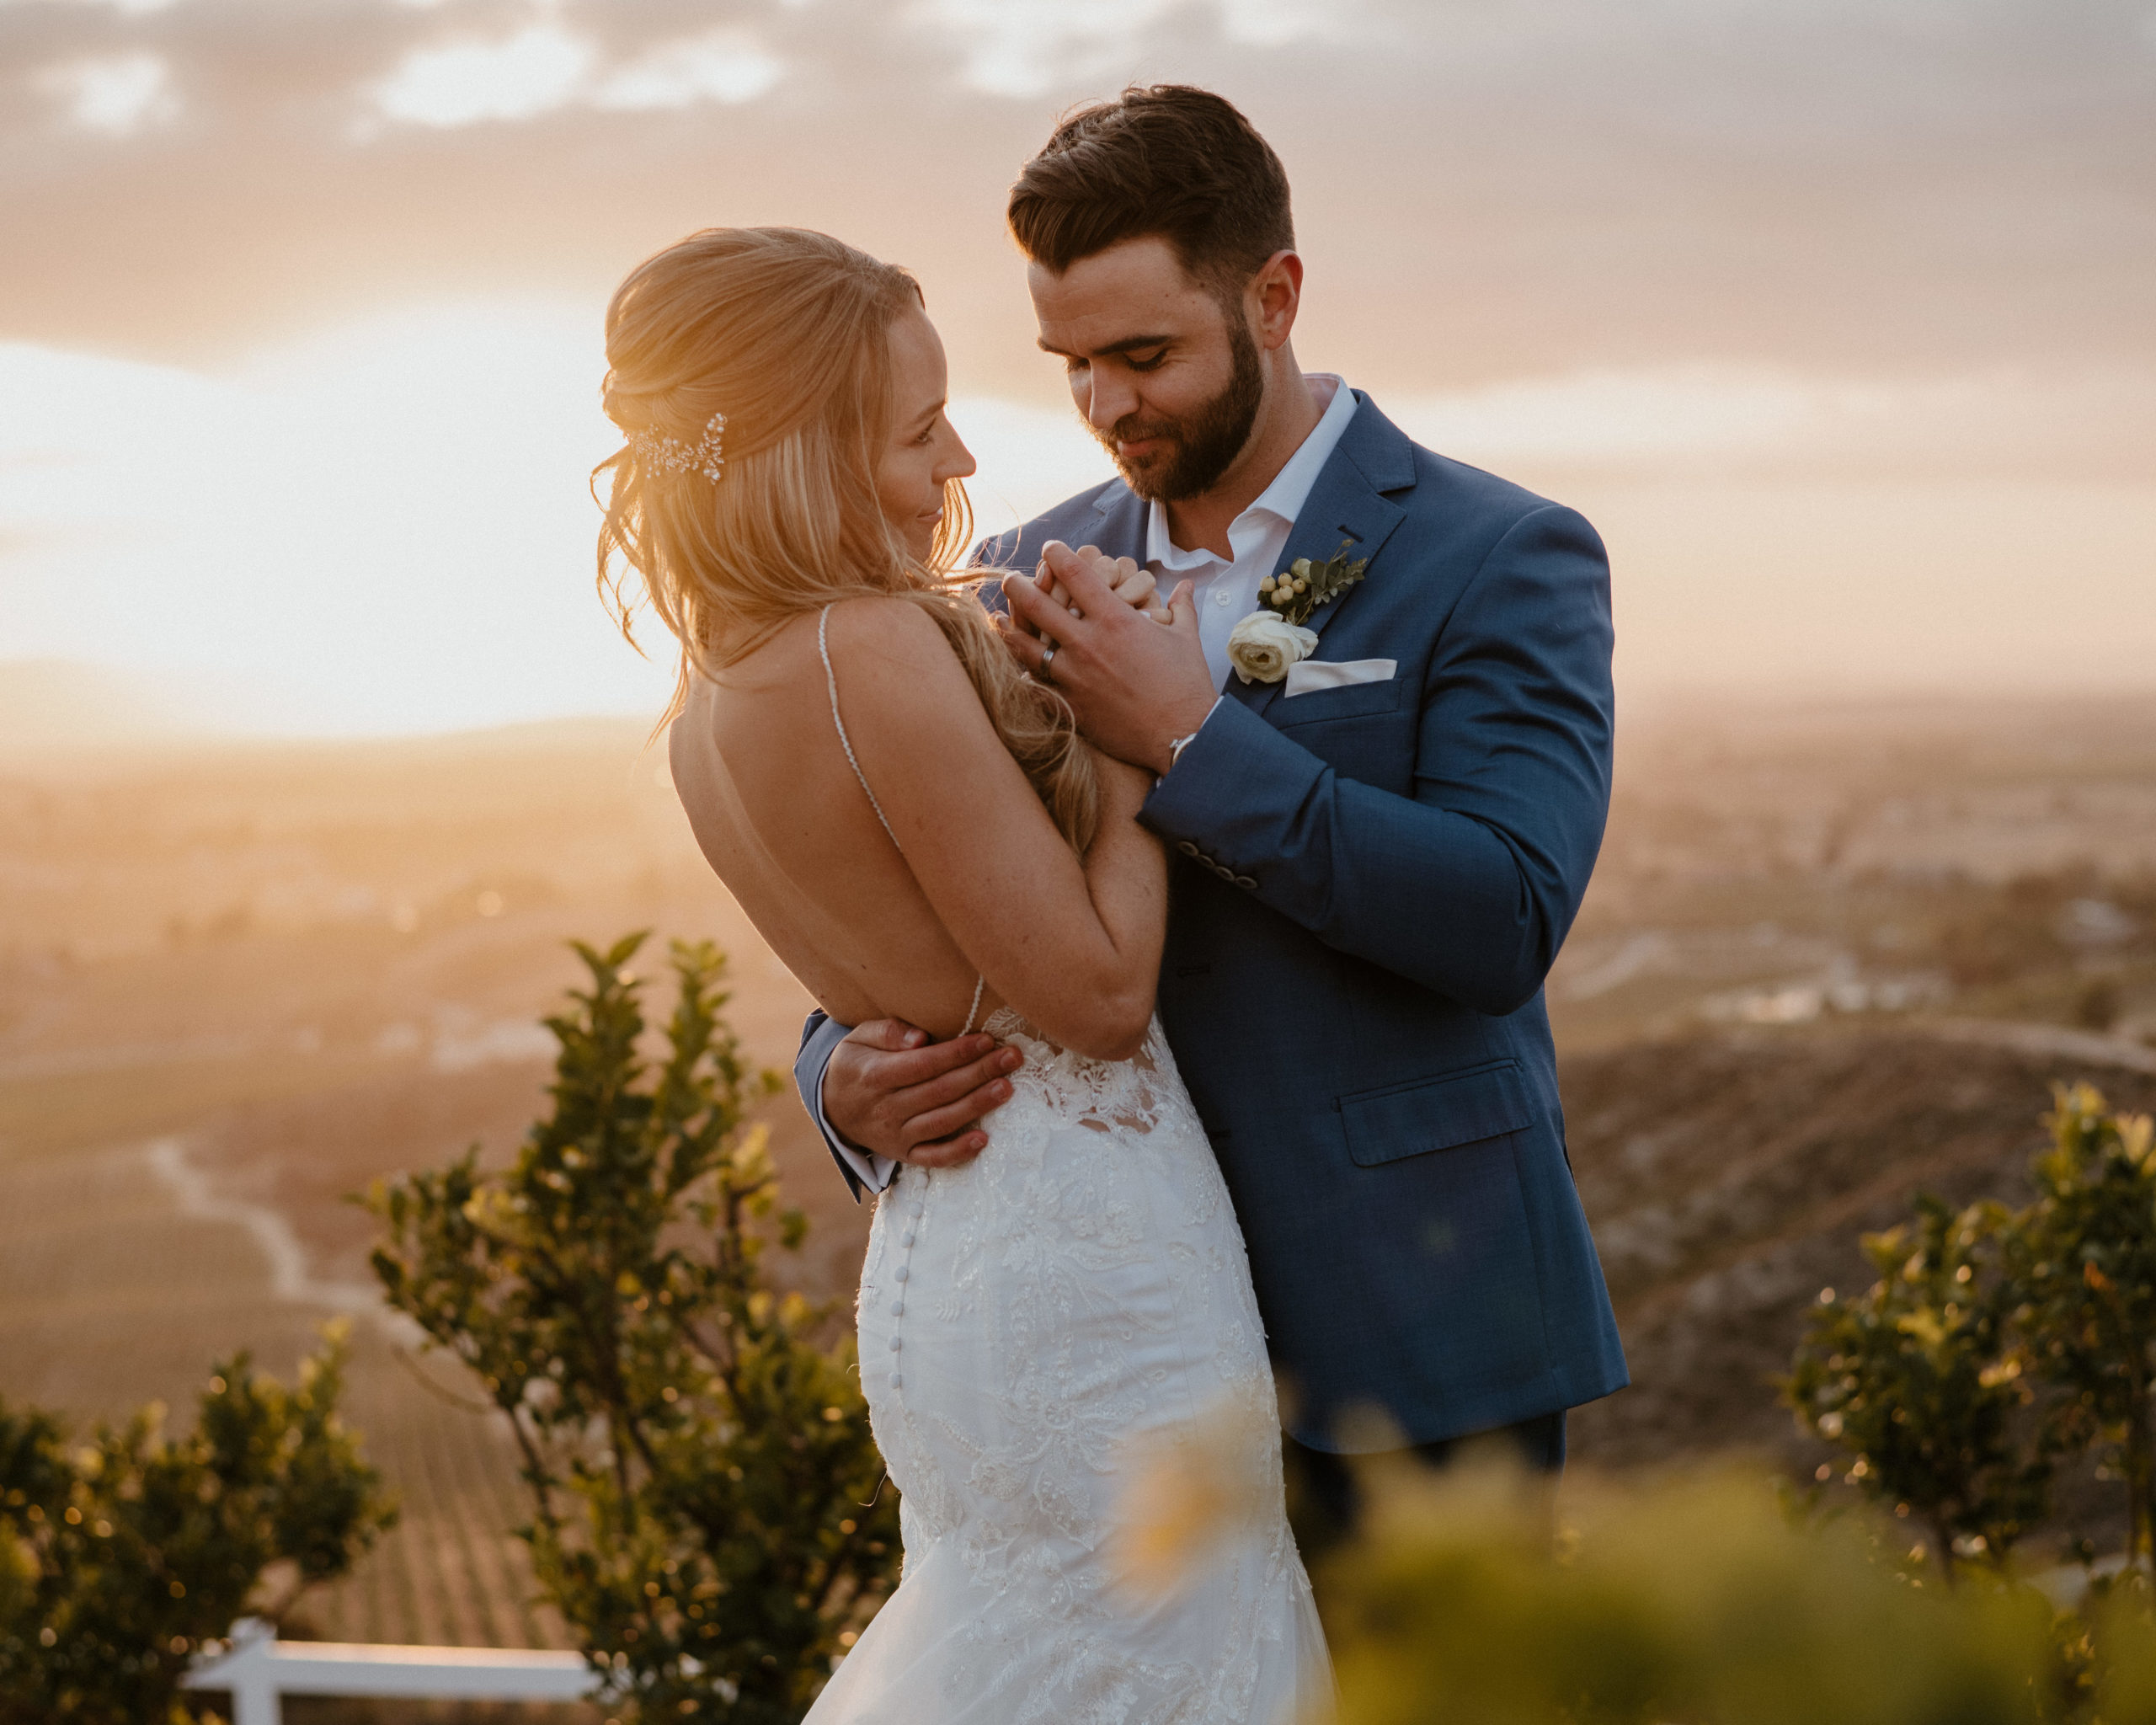 A bride and groom at their intimate elopement in Temecula, CA.